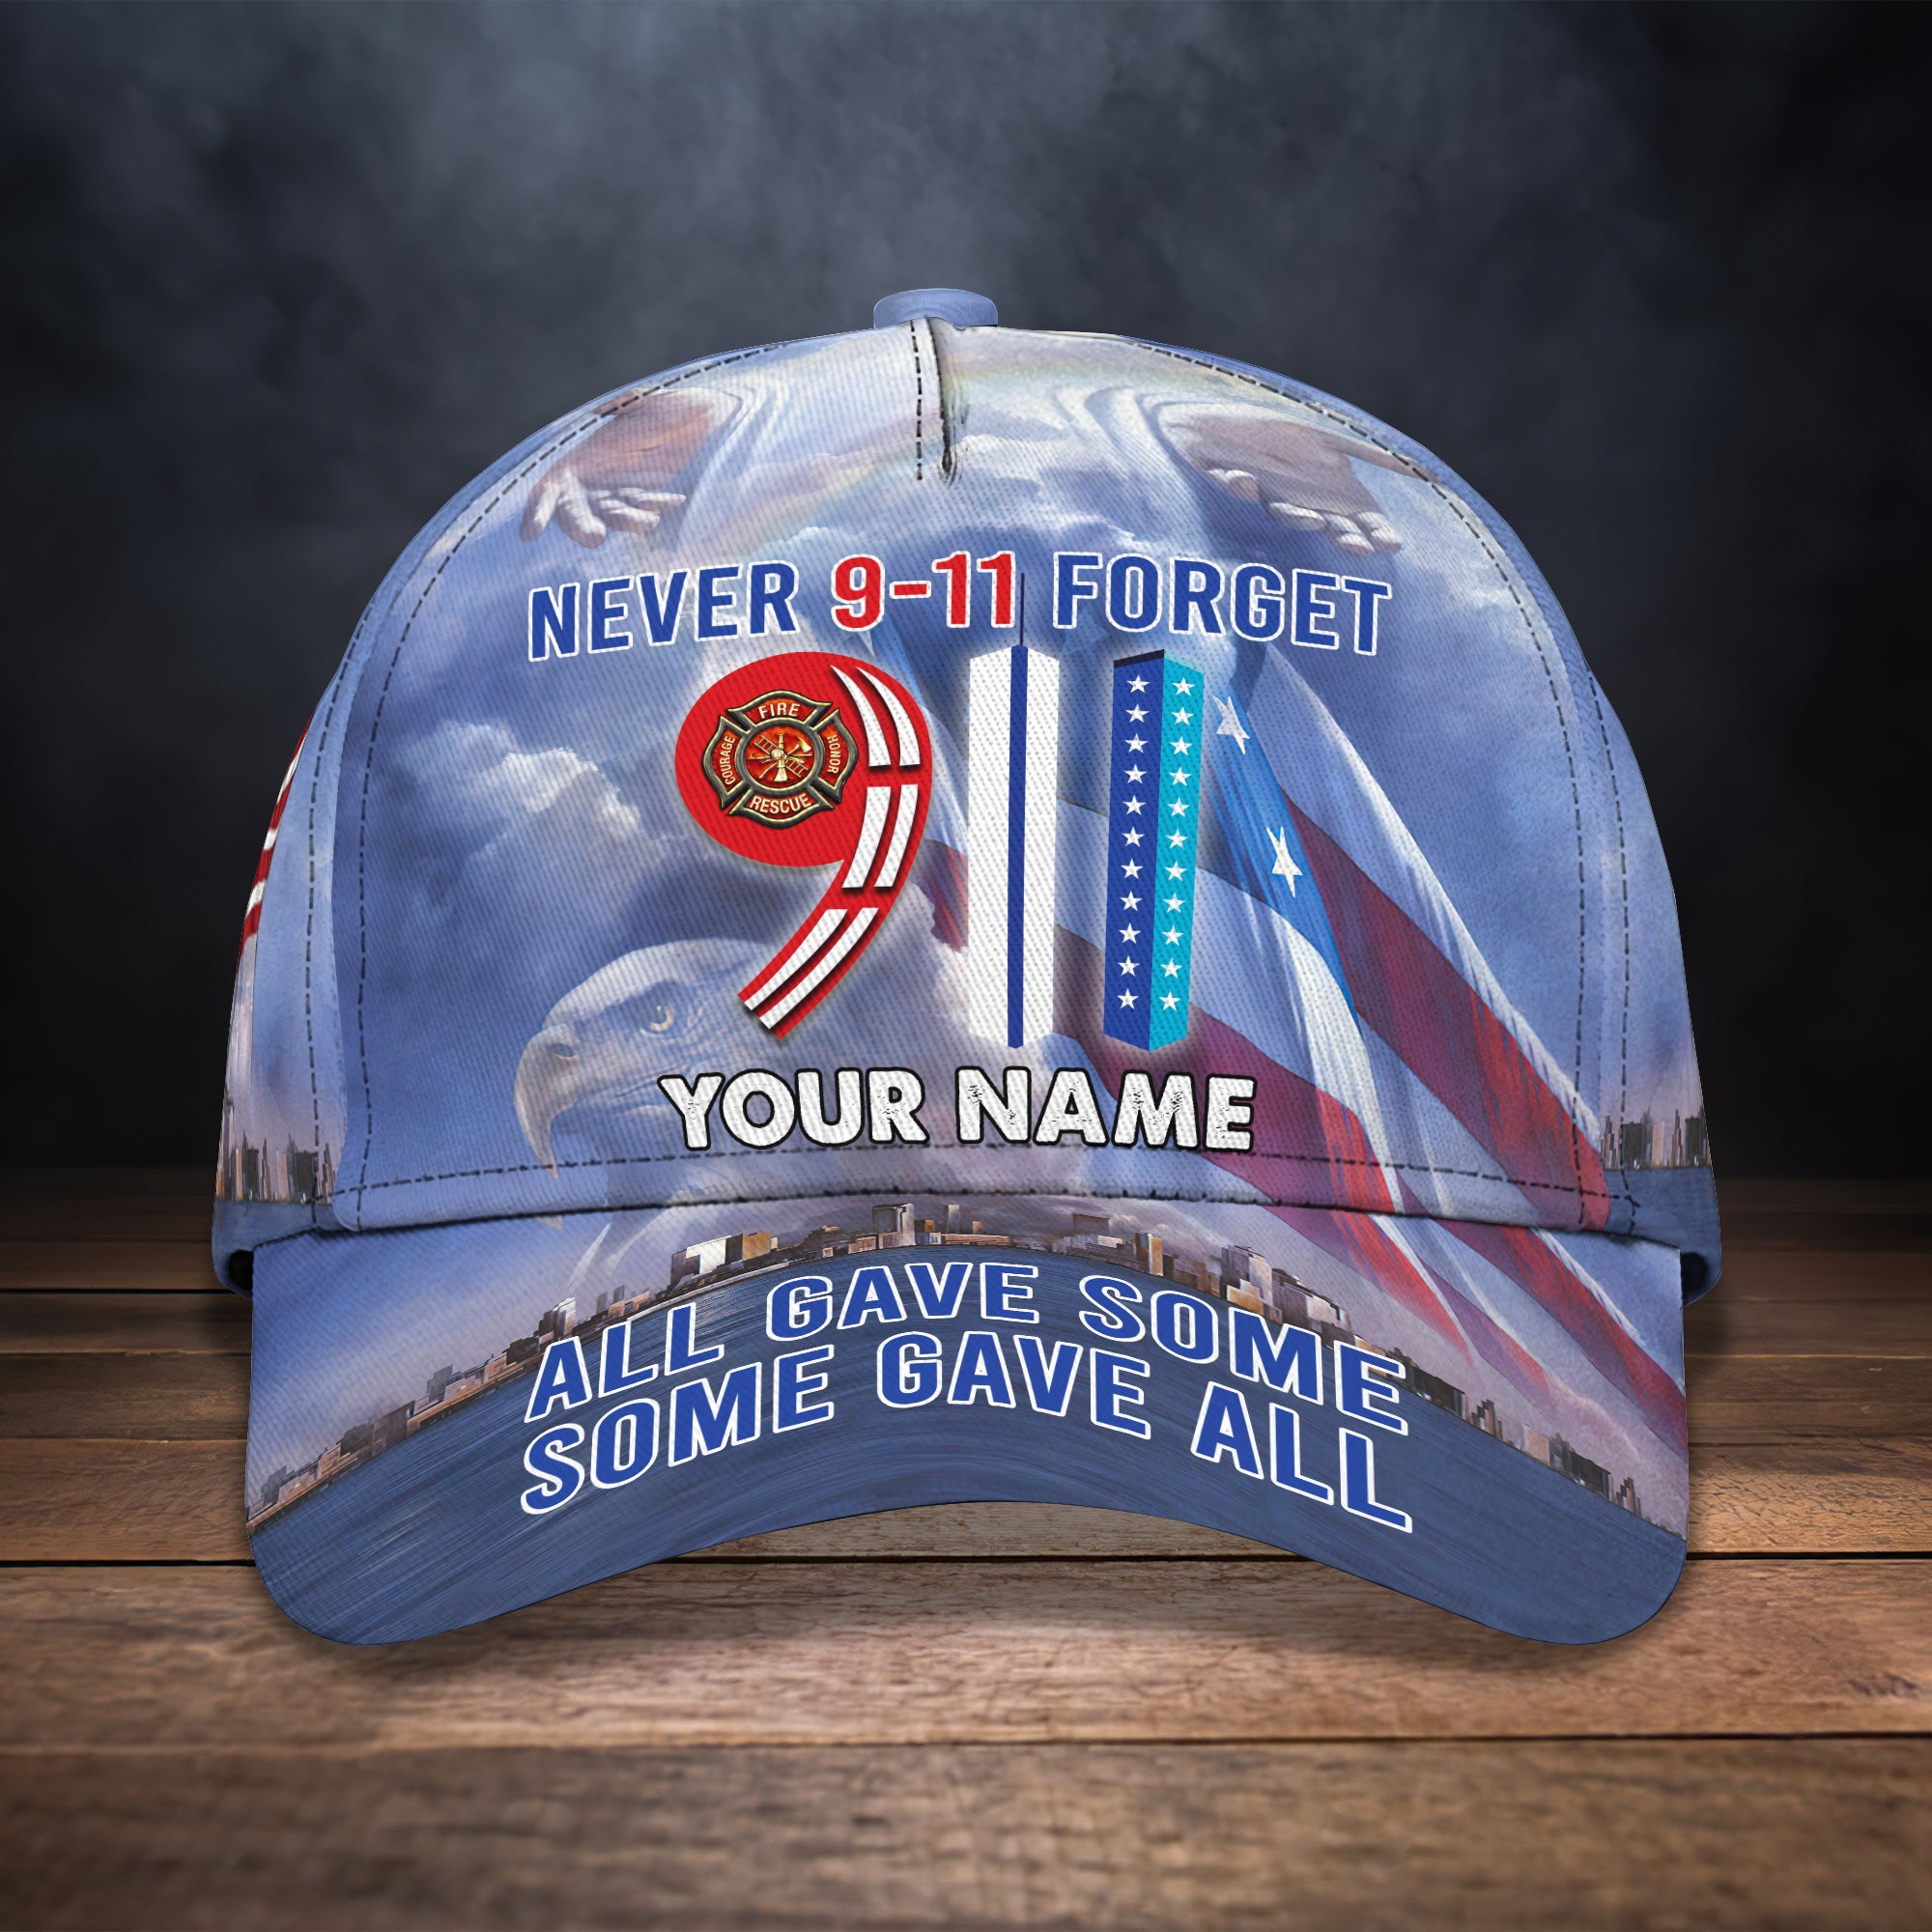 9.11 NEVER FORGET - Personalized Name Cap 01 - CV98